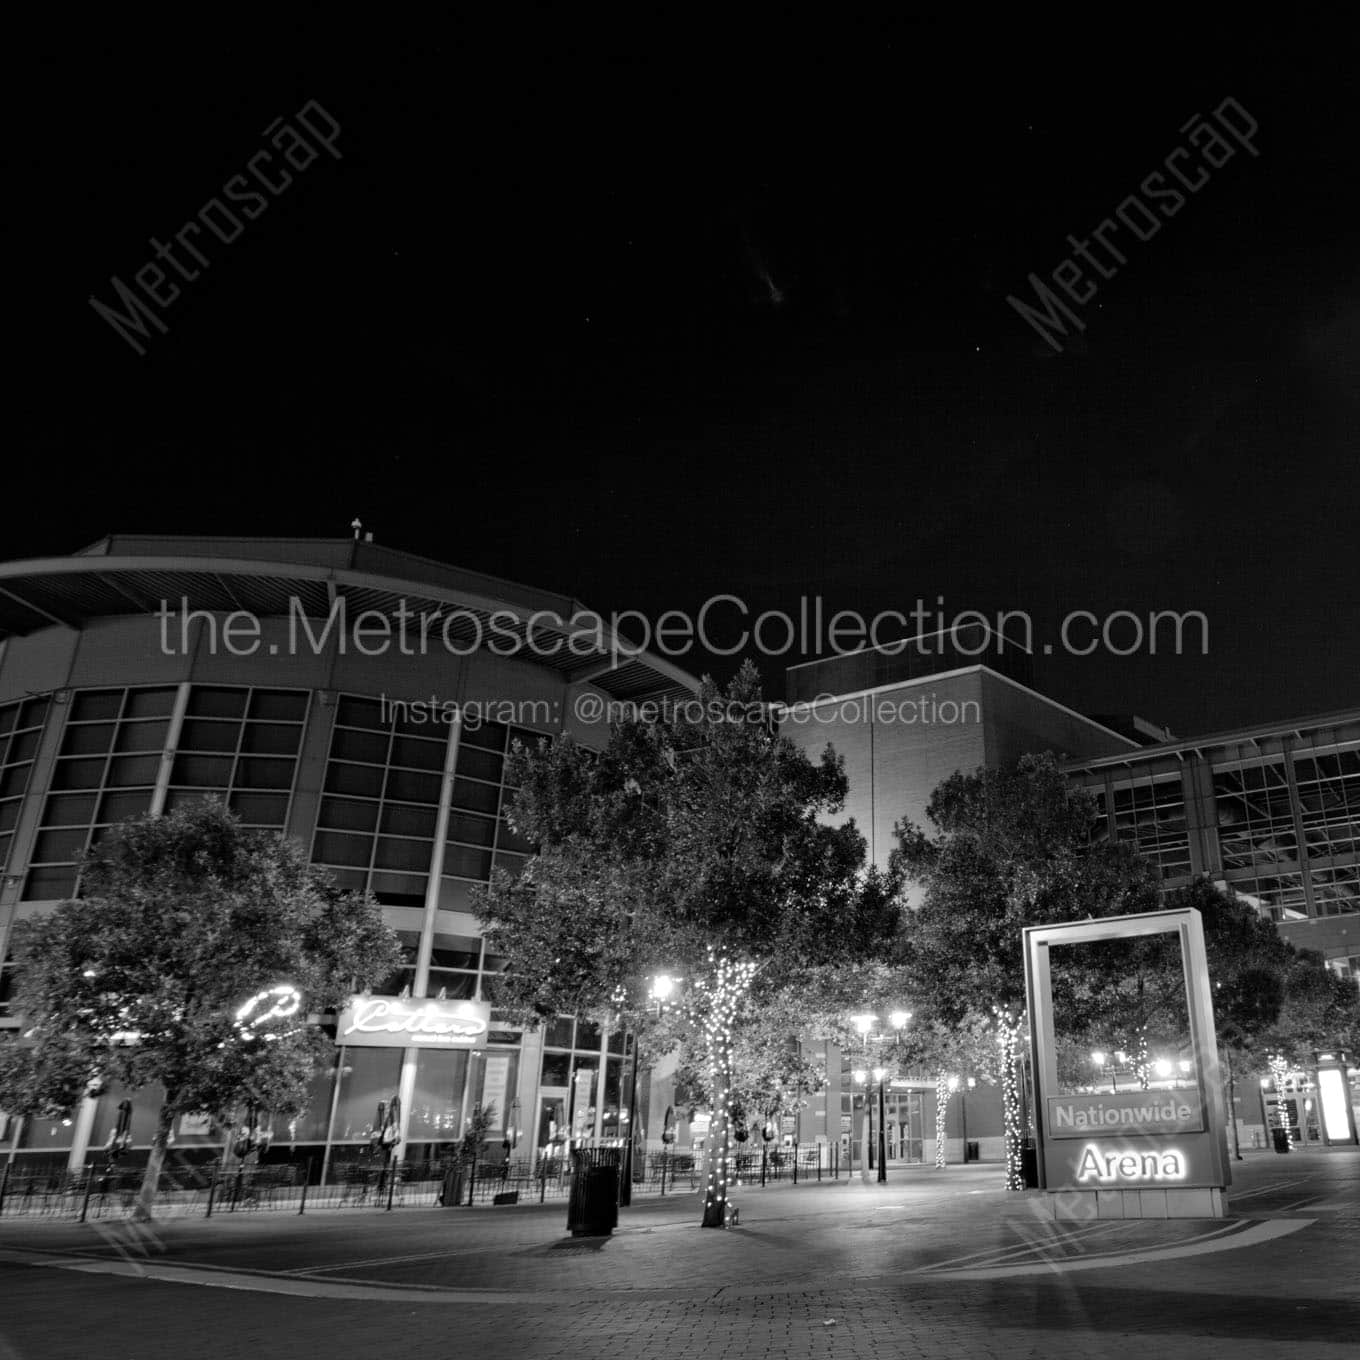 nationwide arena at night Black & White Wall Art